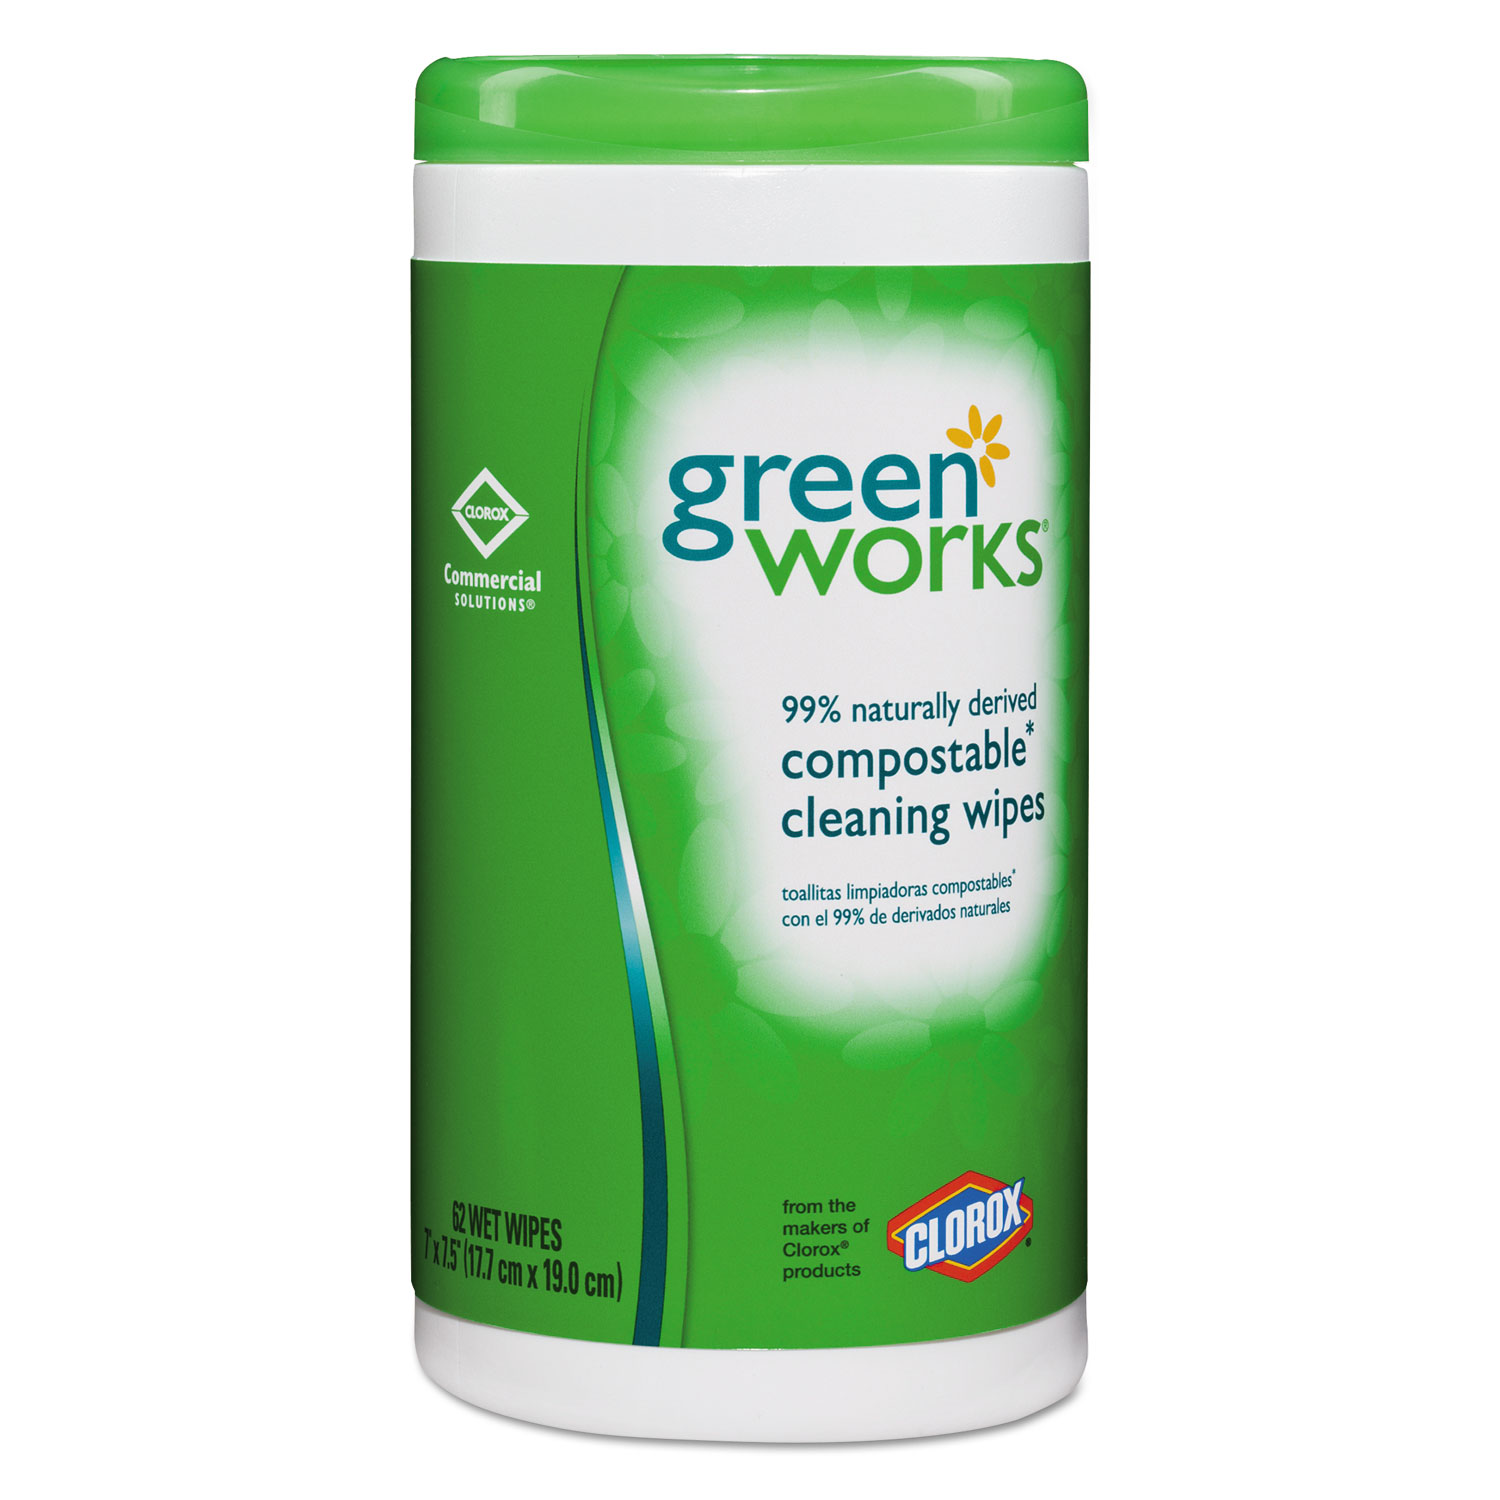  Green Works 10044600303802 Compostable Cleaning Wipes, 7 x 7 1/2, Original Scent, 62/Canister (CLO30380) 